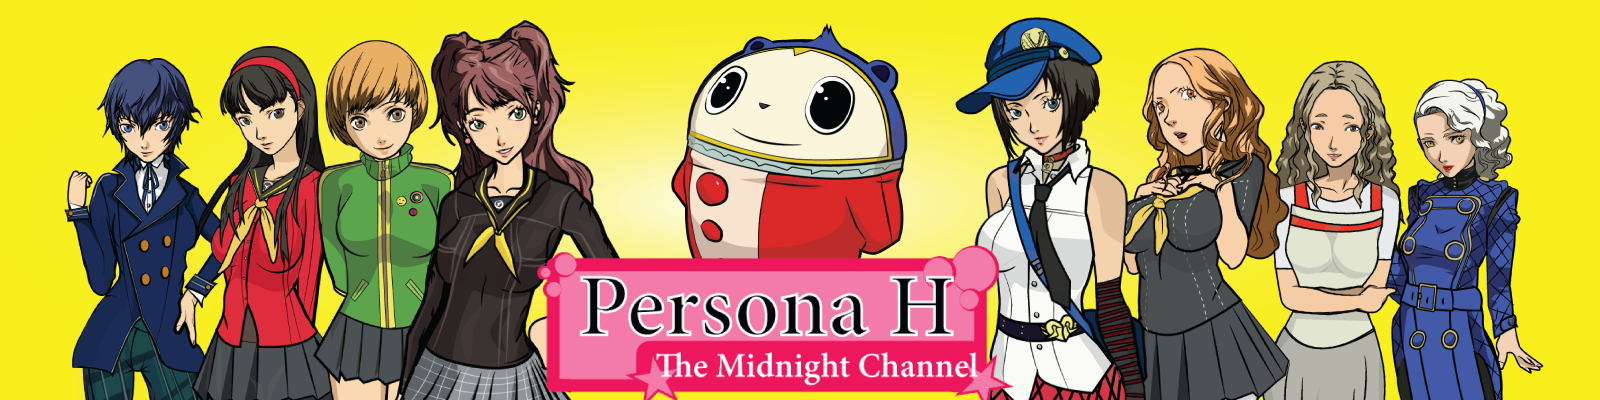 Persona H: The Midnight Channel (v0.1.14 Remake)